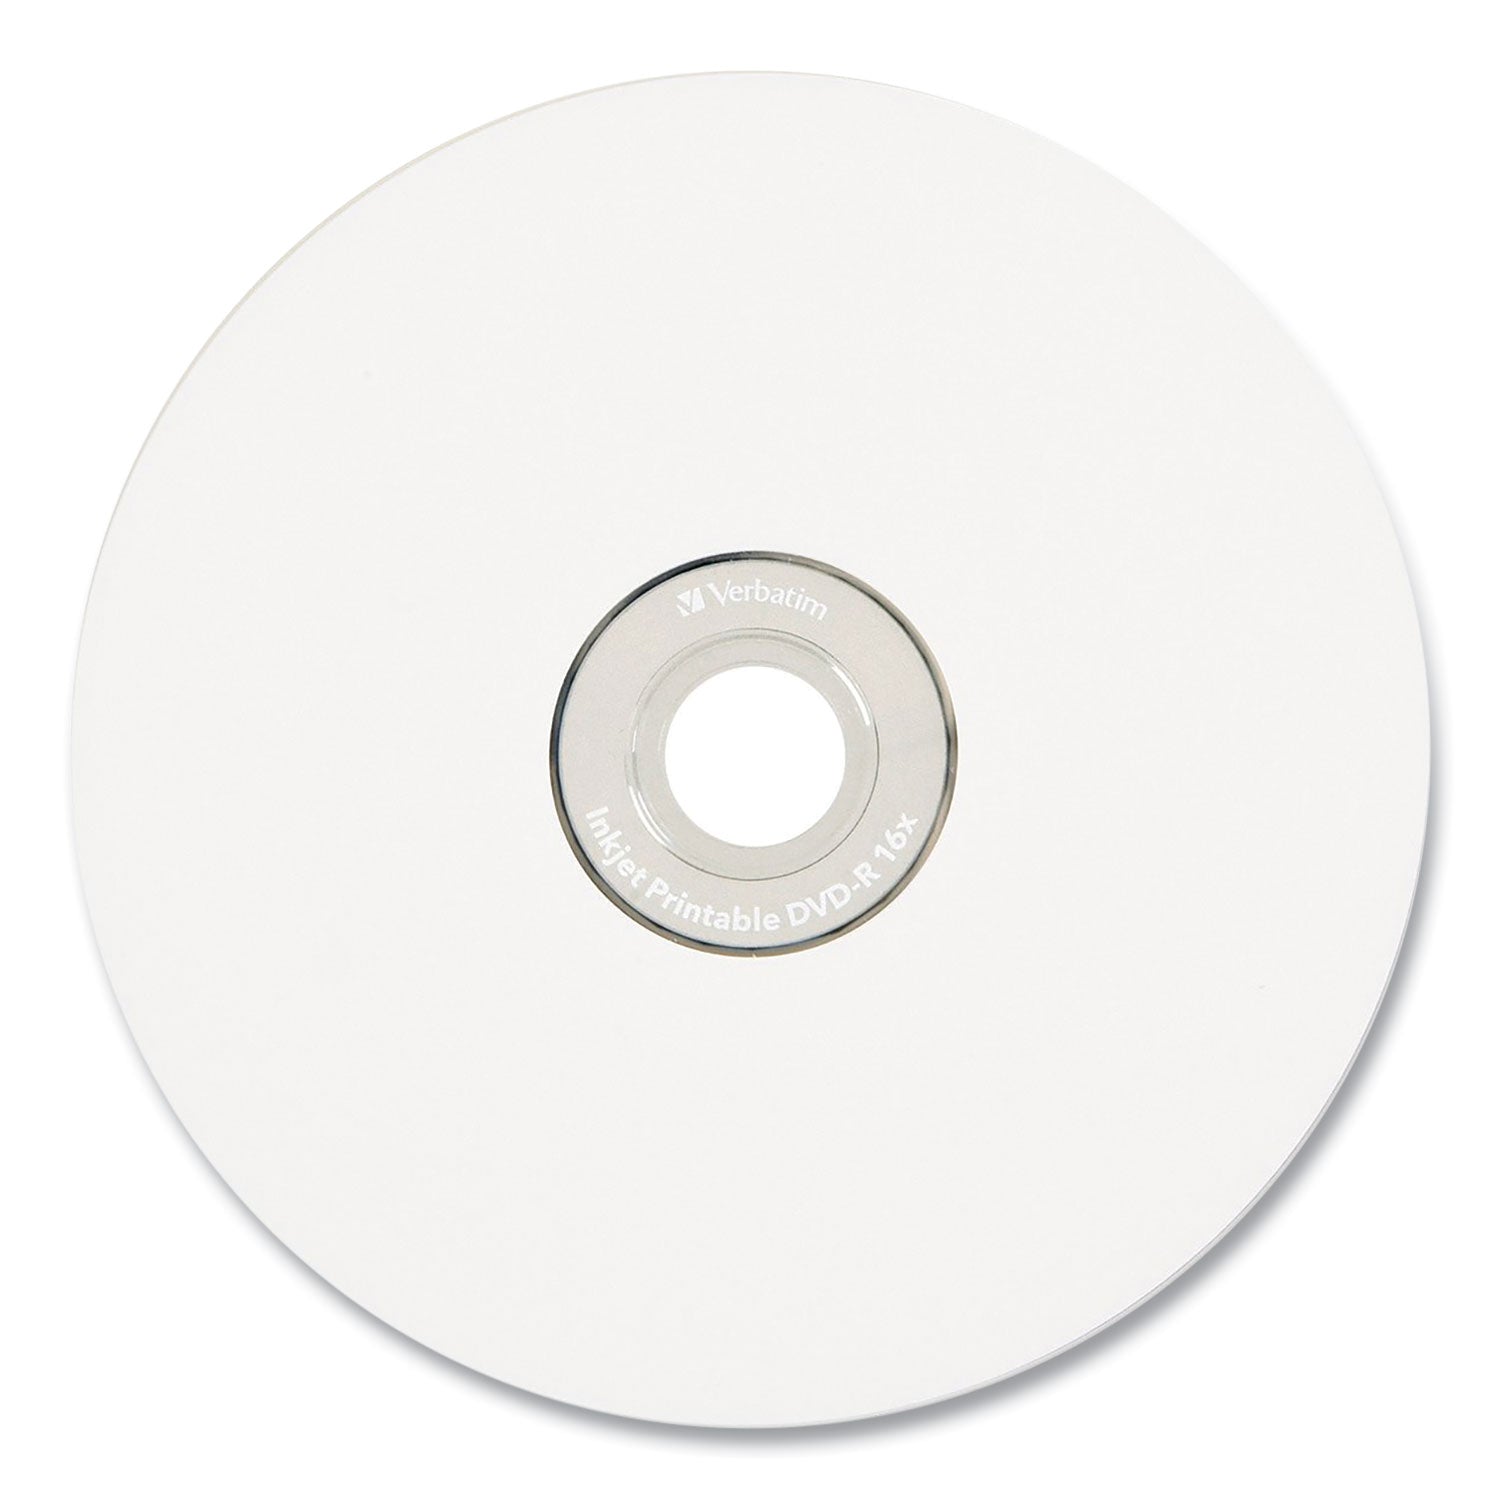 DVD-R Recordable Disc, 4.7 GB, 16x, Spindle, White, 50/Pack - 